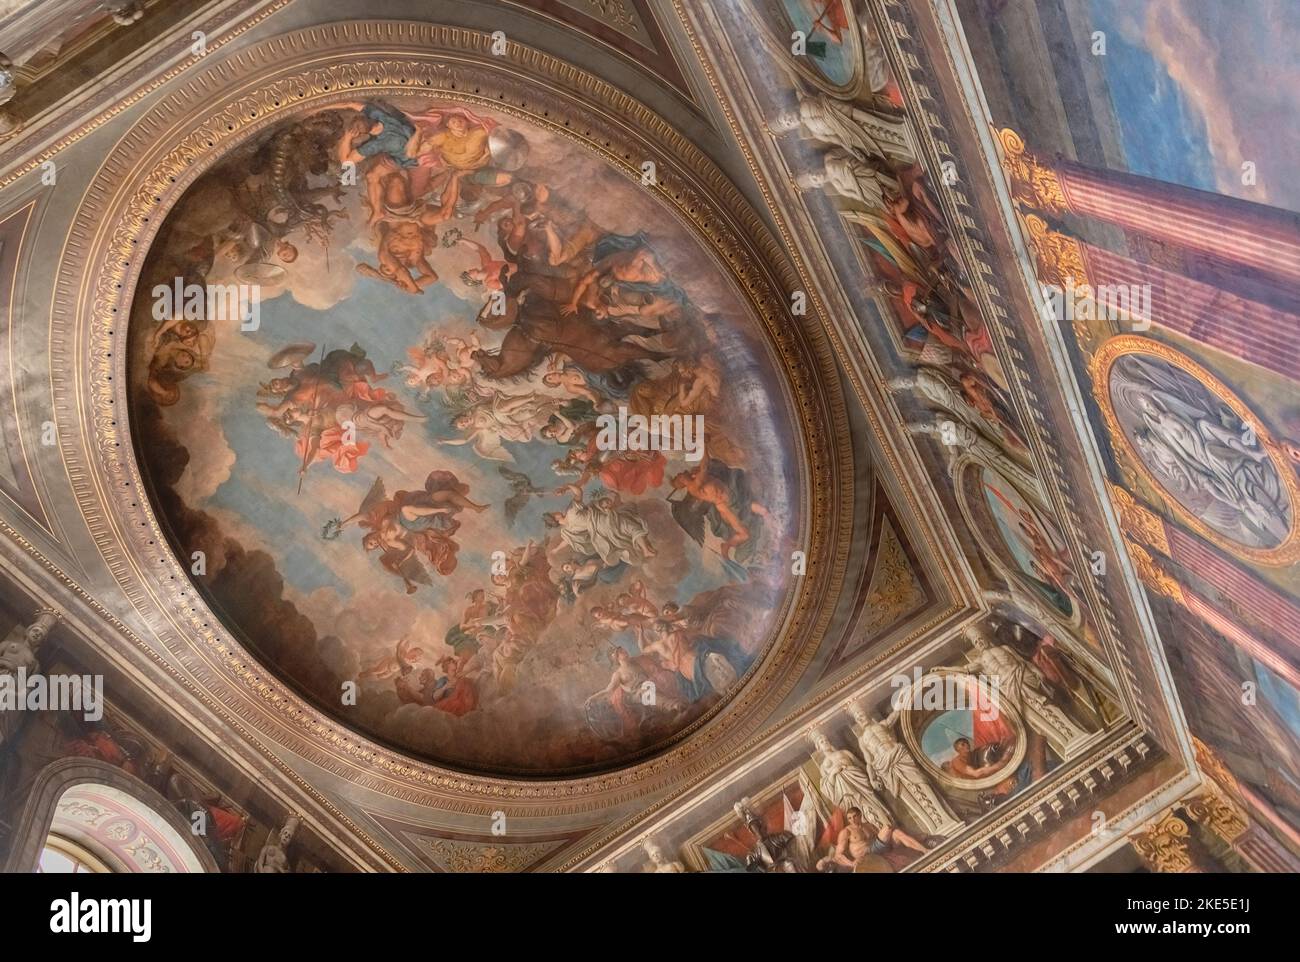 England, Oxfordshire, Woodstock, Blenheim Palace, the ceiling of what was formerly called The Saloon now known as the State Dining Room featuring walls and ceilings painted by French decorative artist Louis Laguerre. Stock Photo